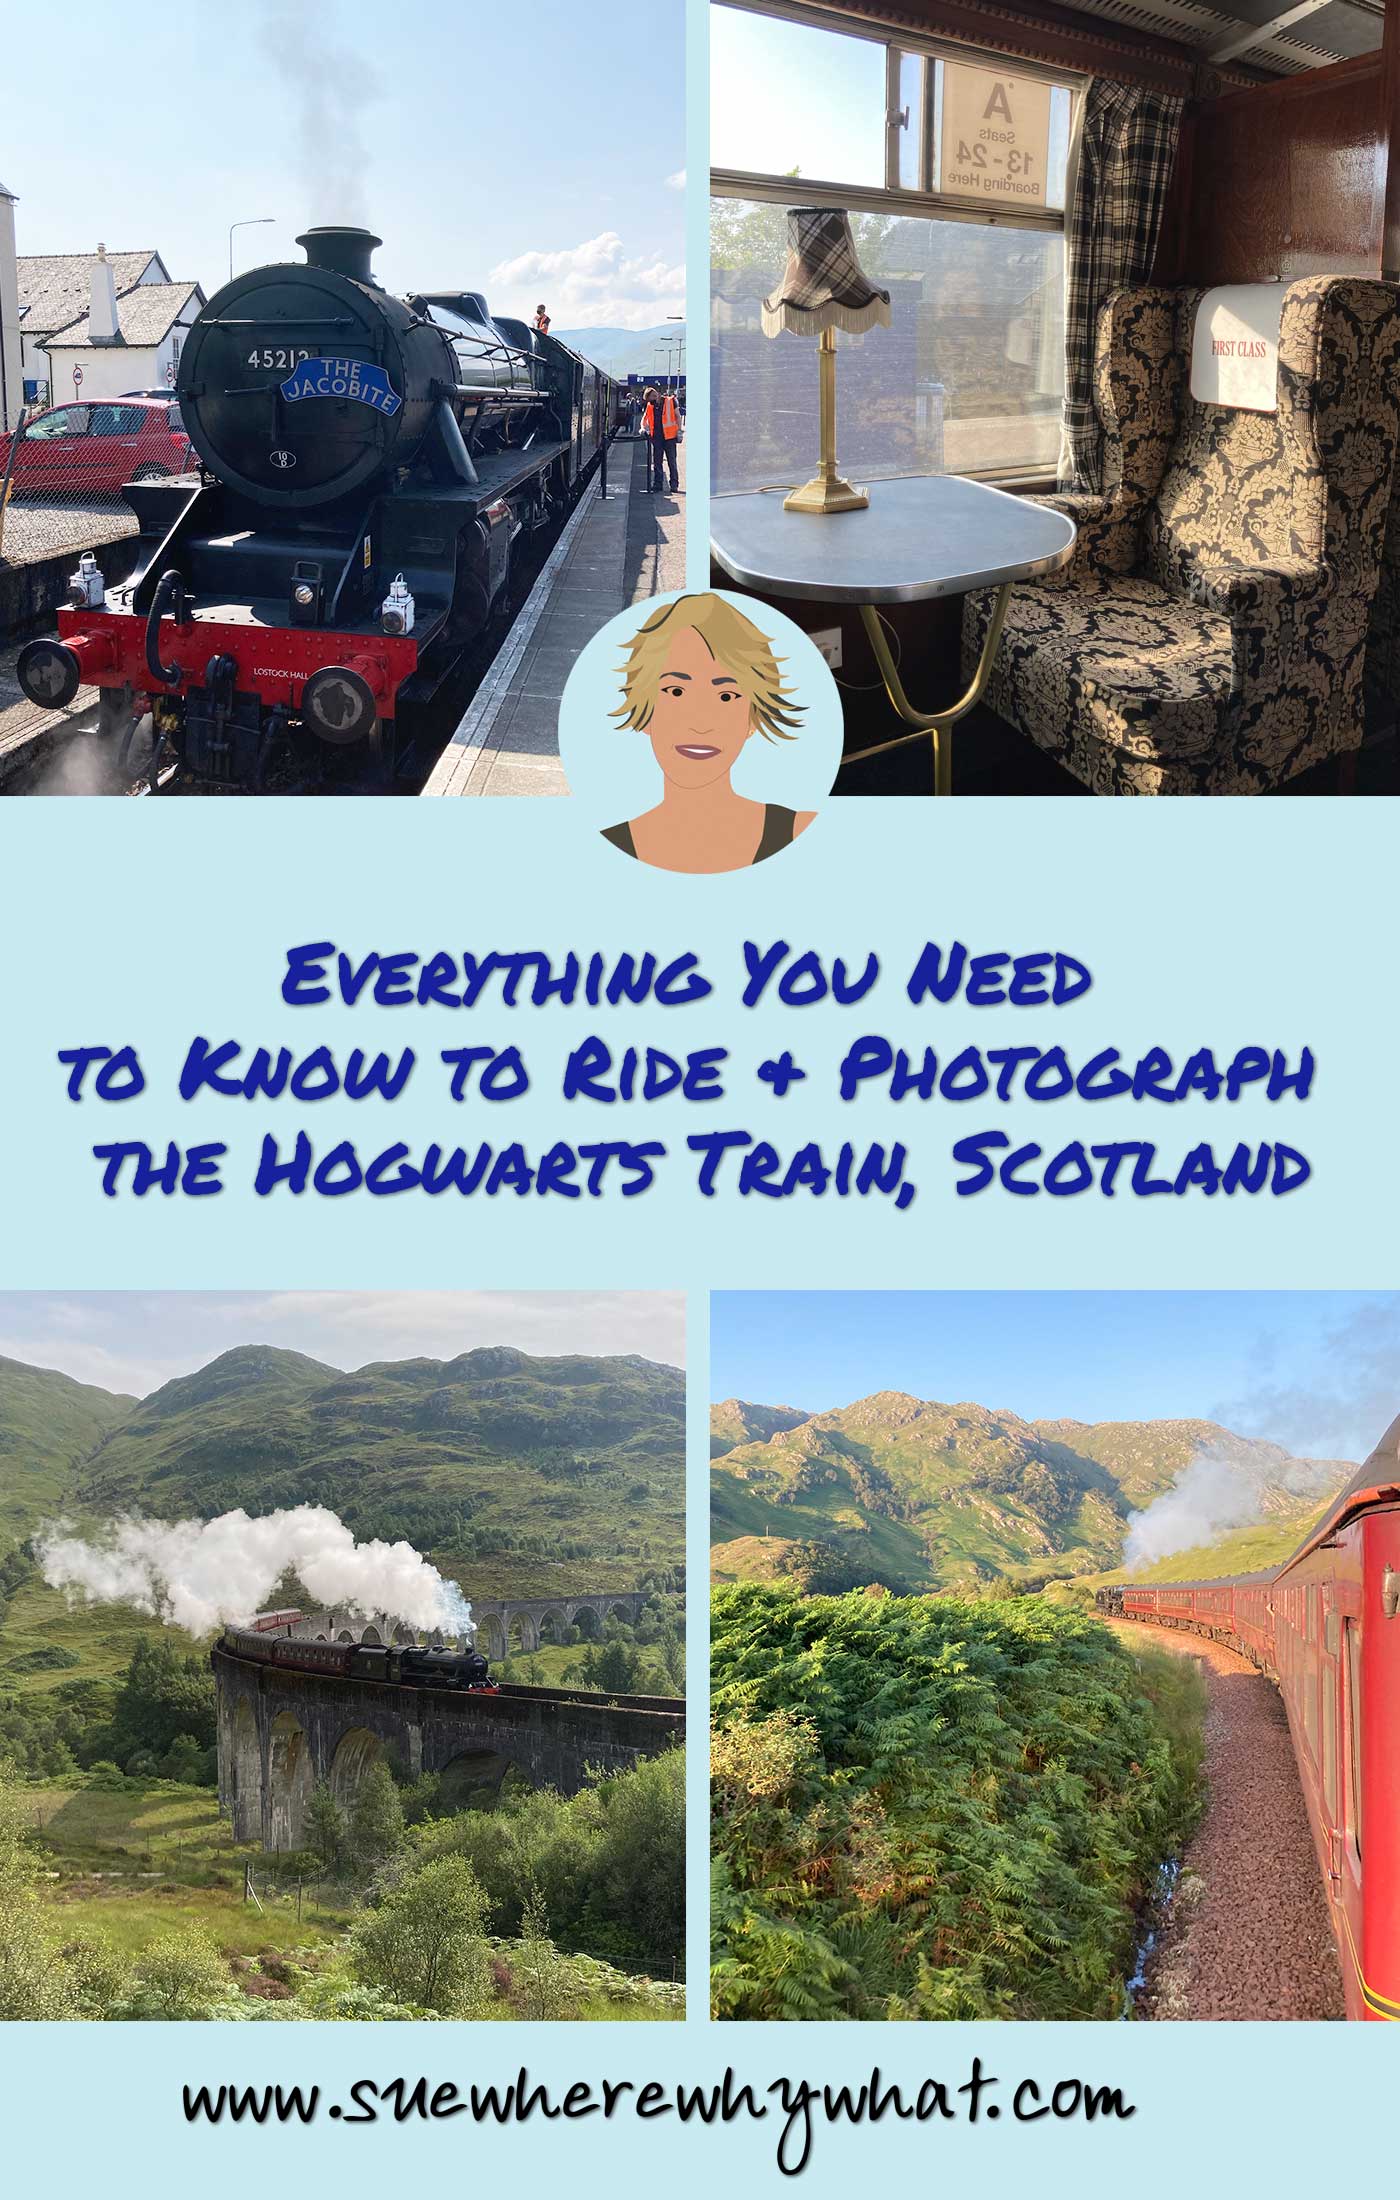 Everything You Need to Know to Ride & Photograph the Hogwarts Train, Scotland